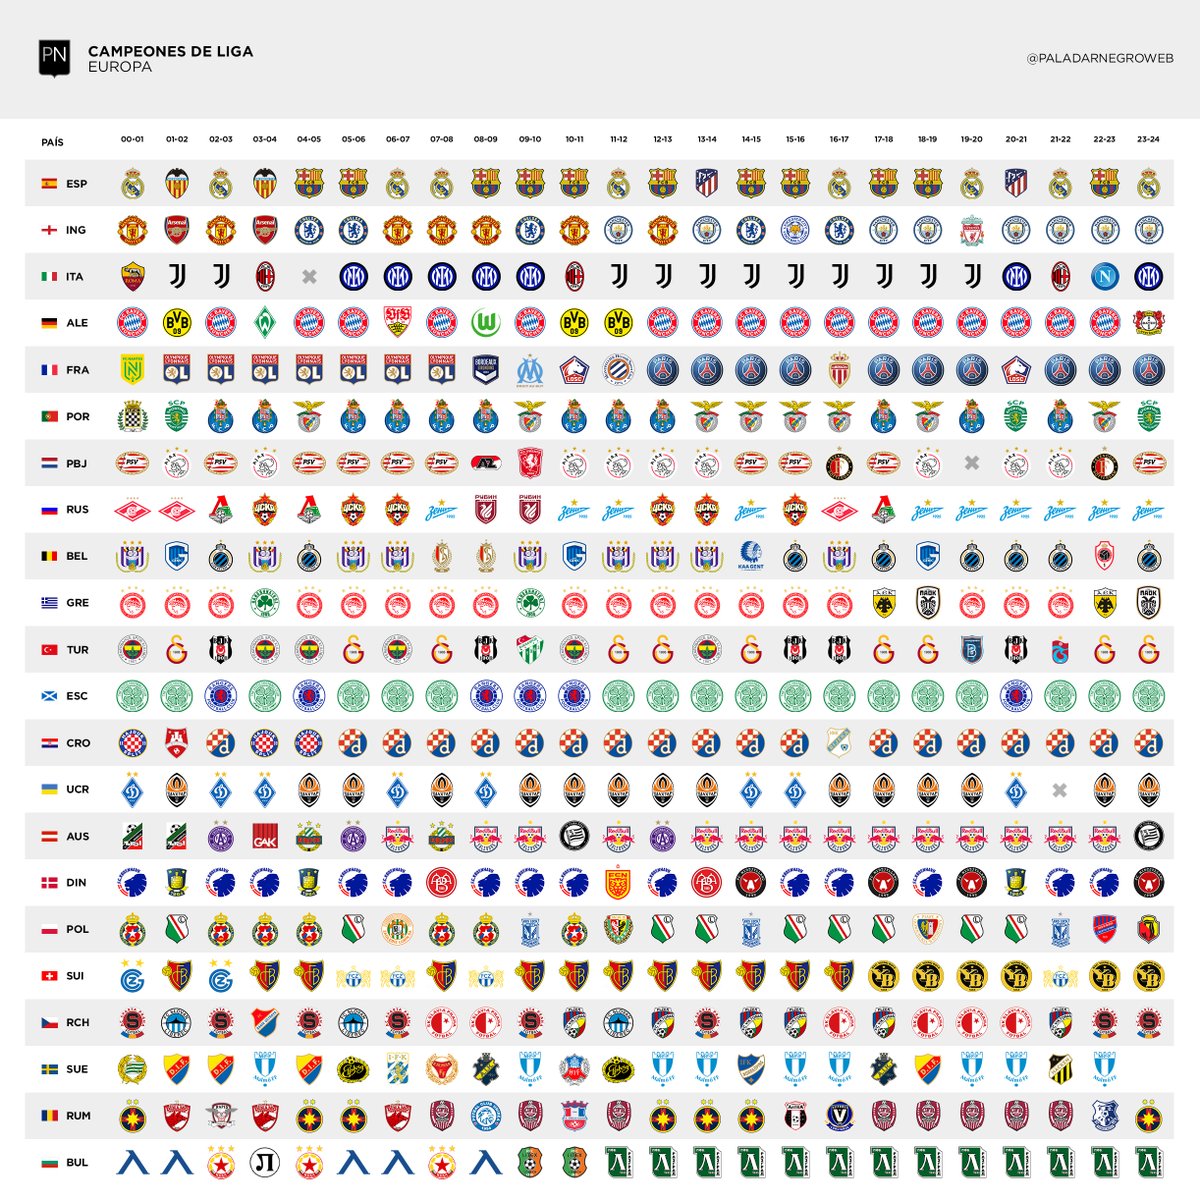 All the champions of Europe's major top-flight leagues this century, meticulously compiled by @PaladarNegroWeb